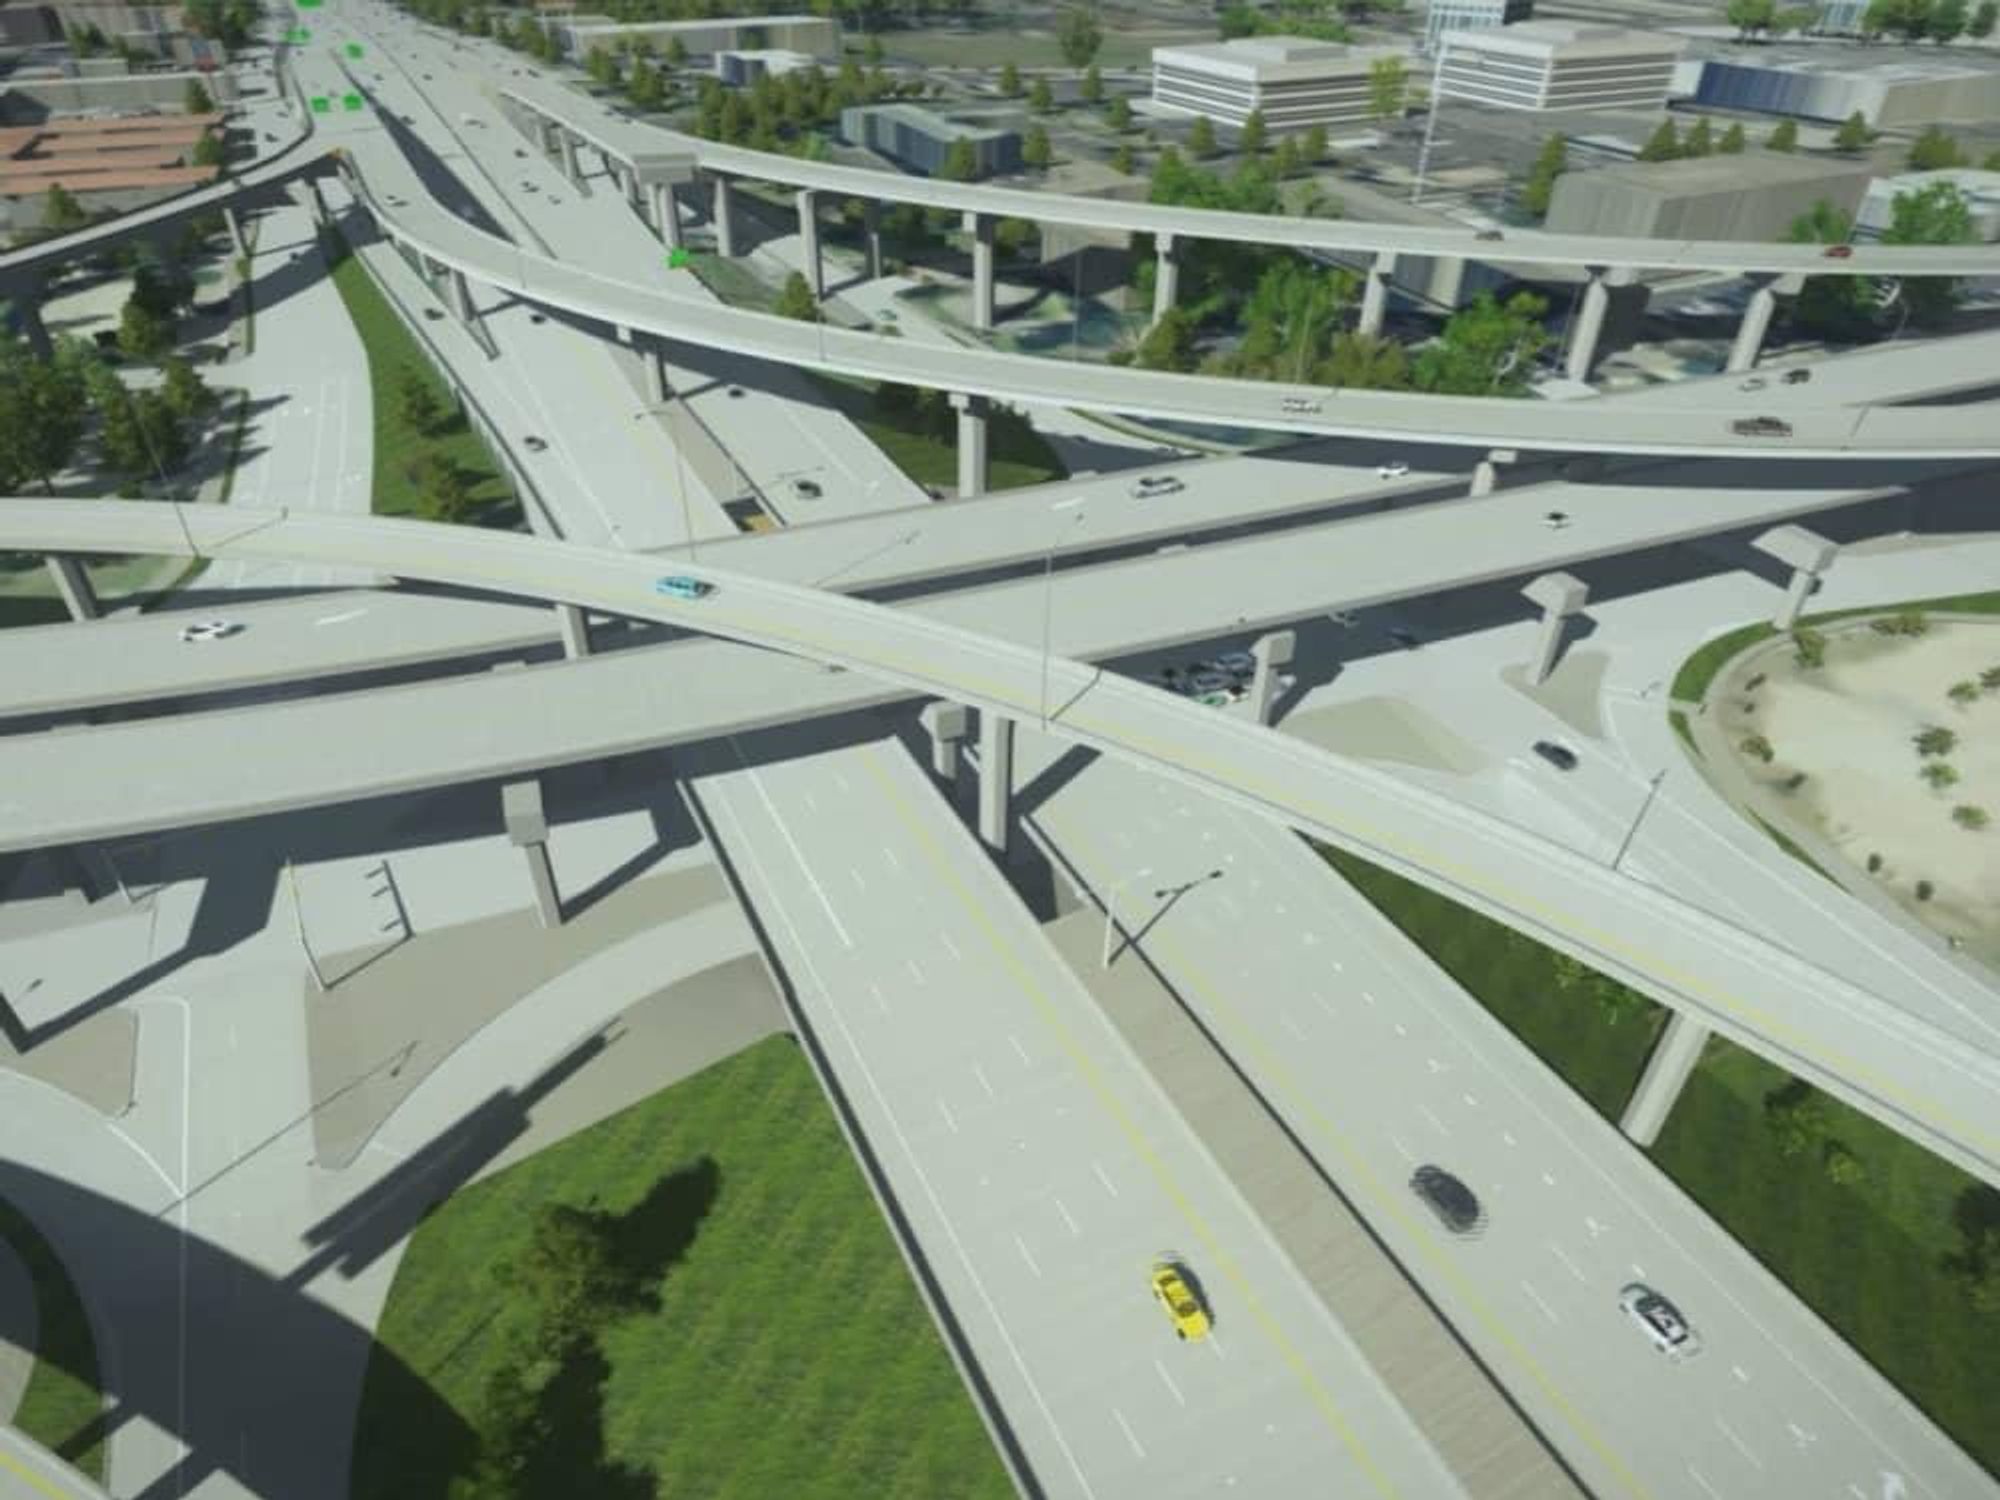 I-35 at 183 North Austin new ramps rendering